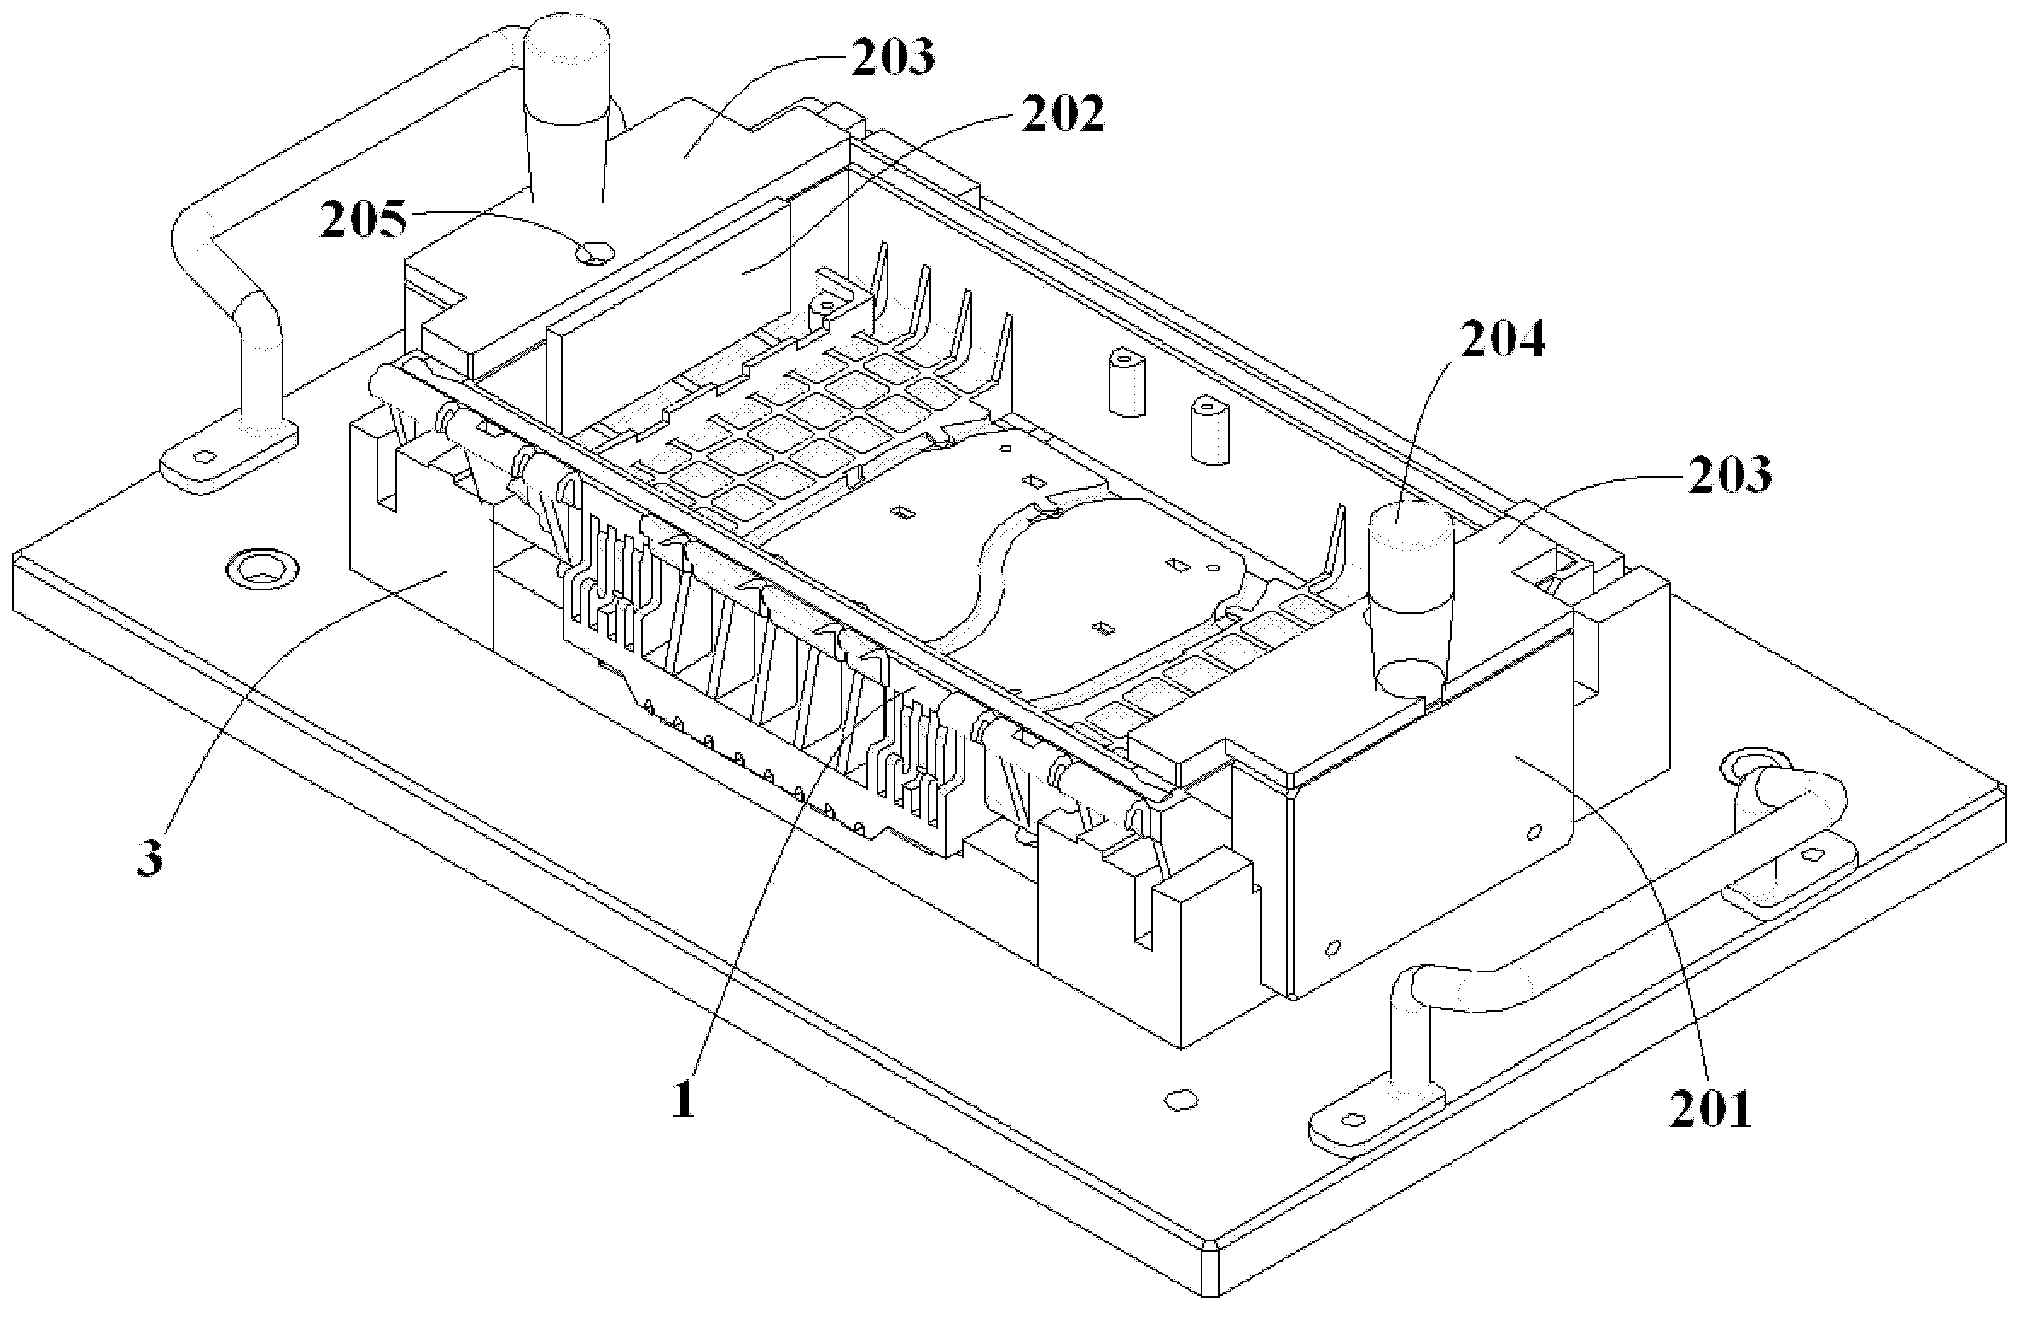 Method for injecting sealants into groove